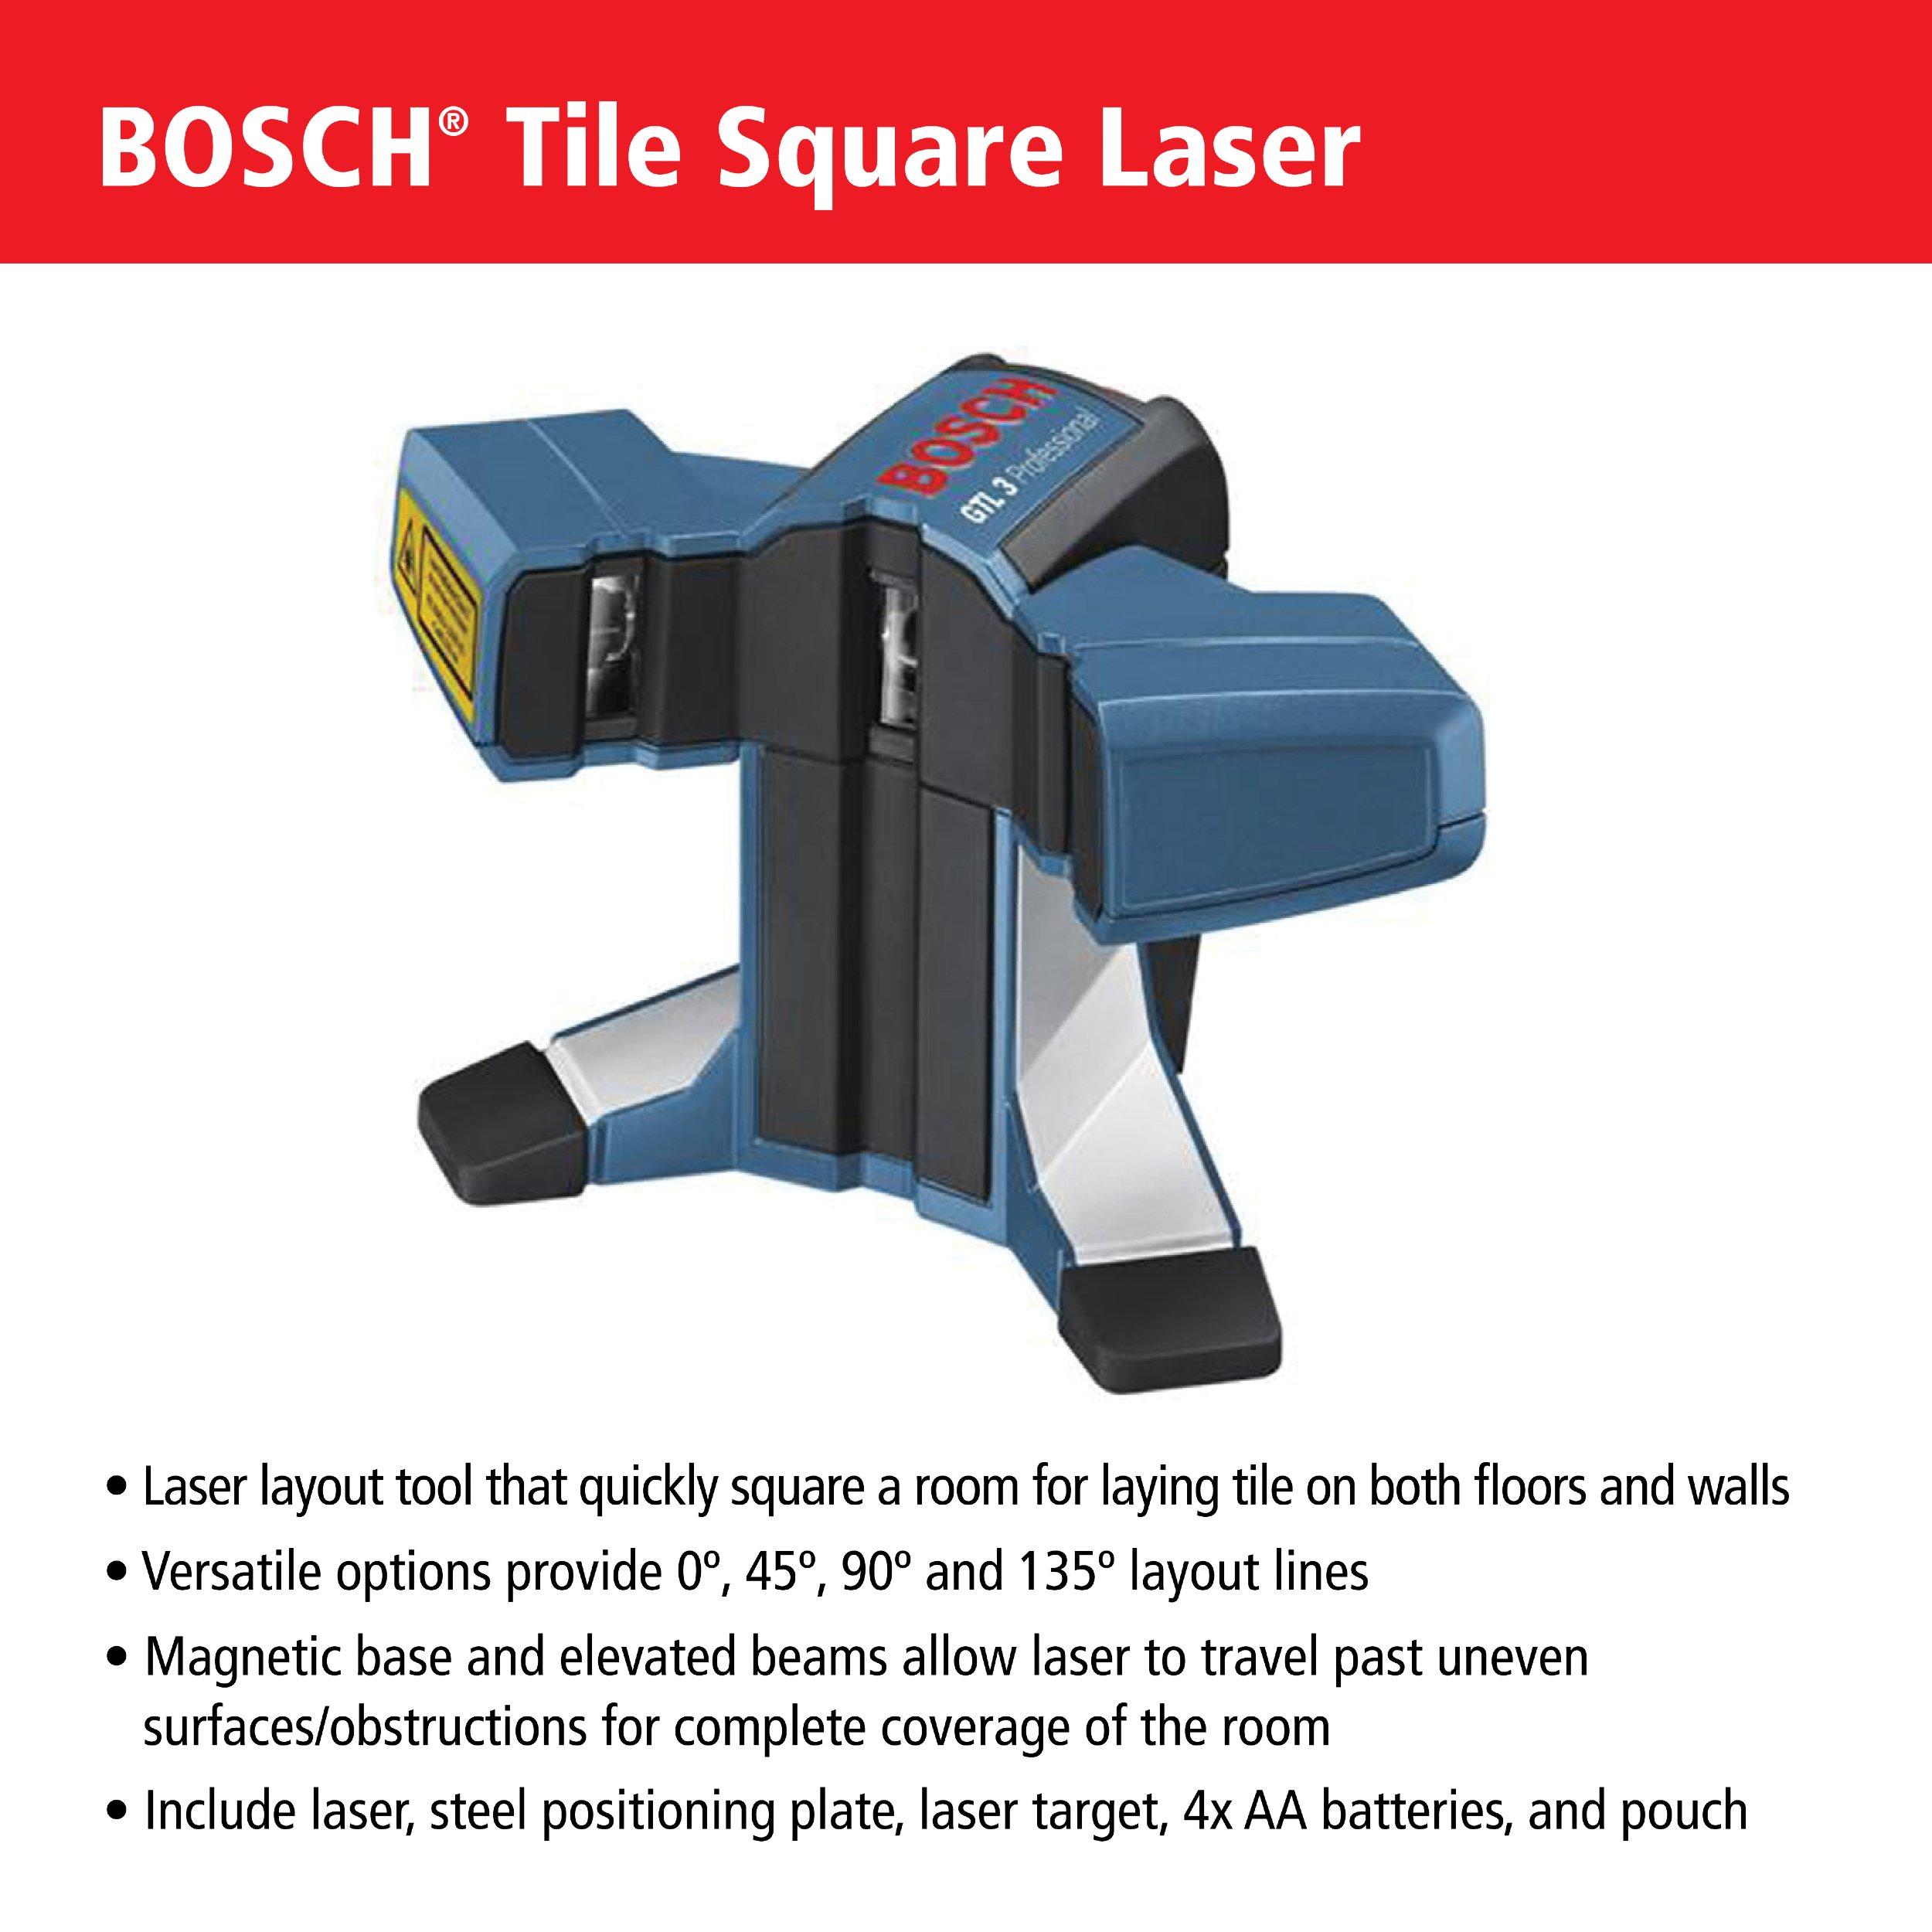 Bosch Wall and Floor Tile Laser